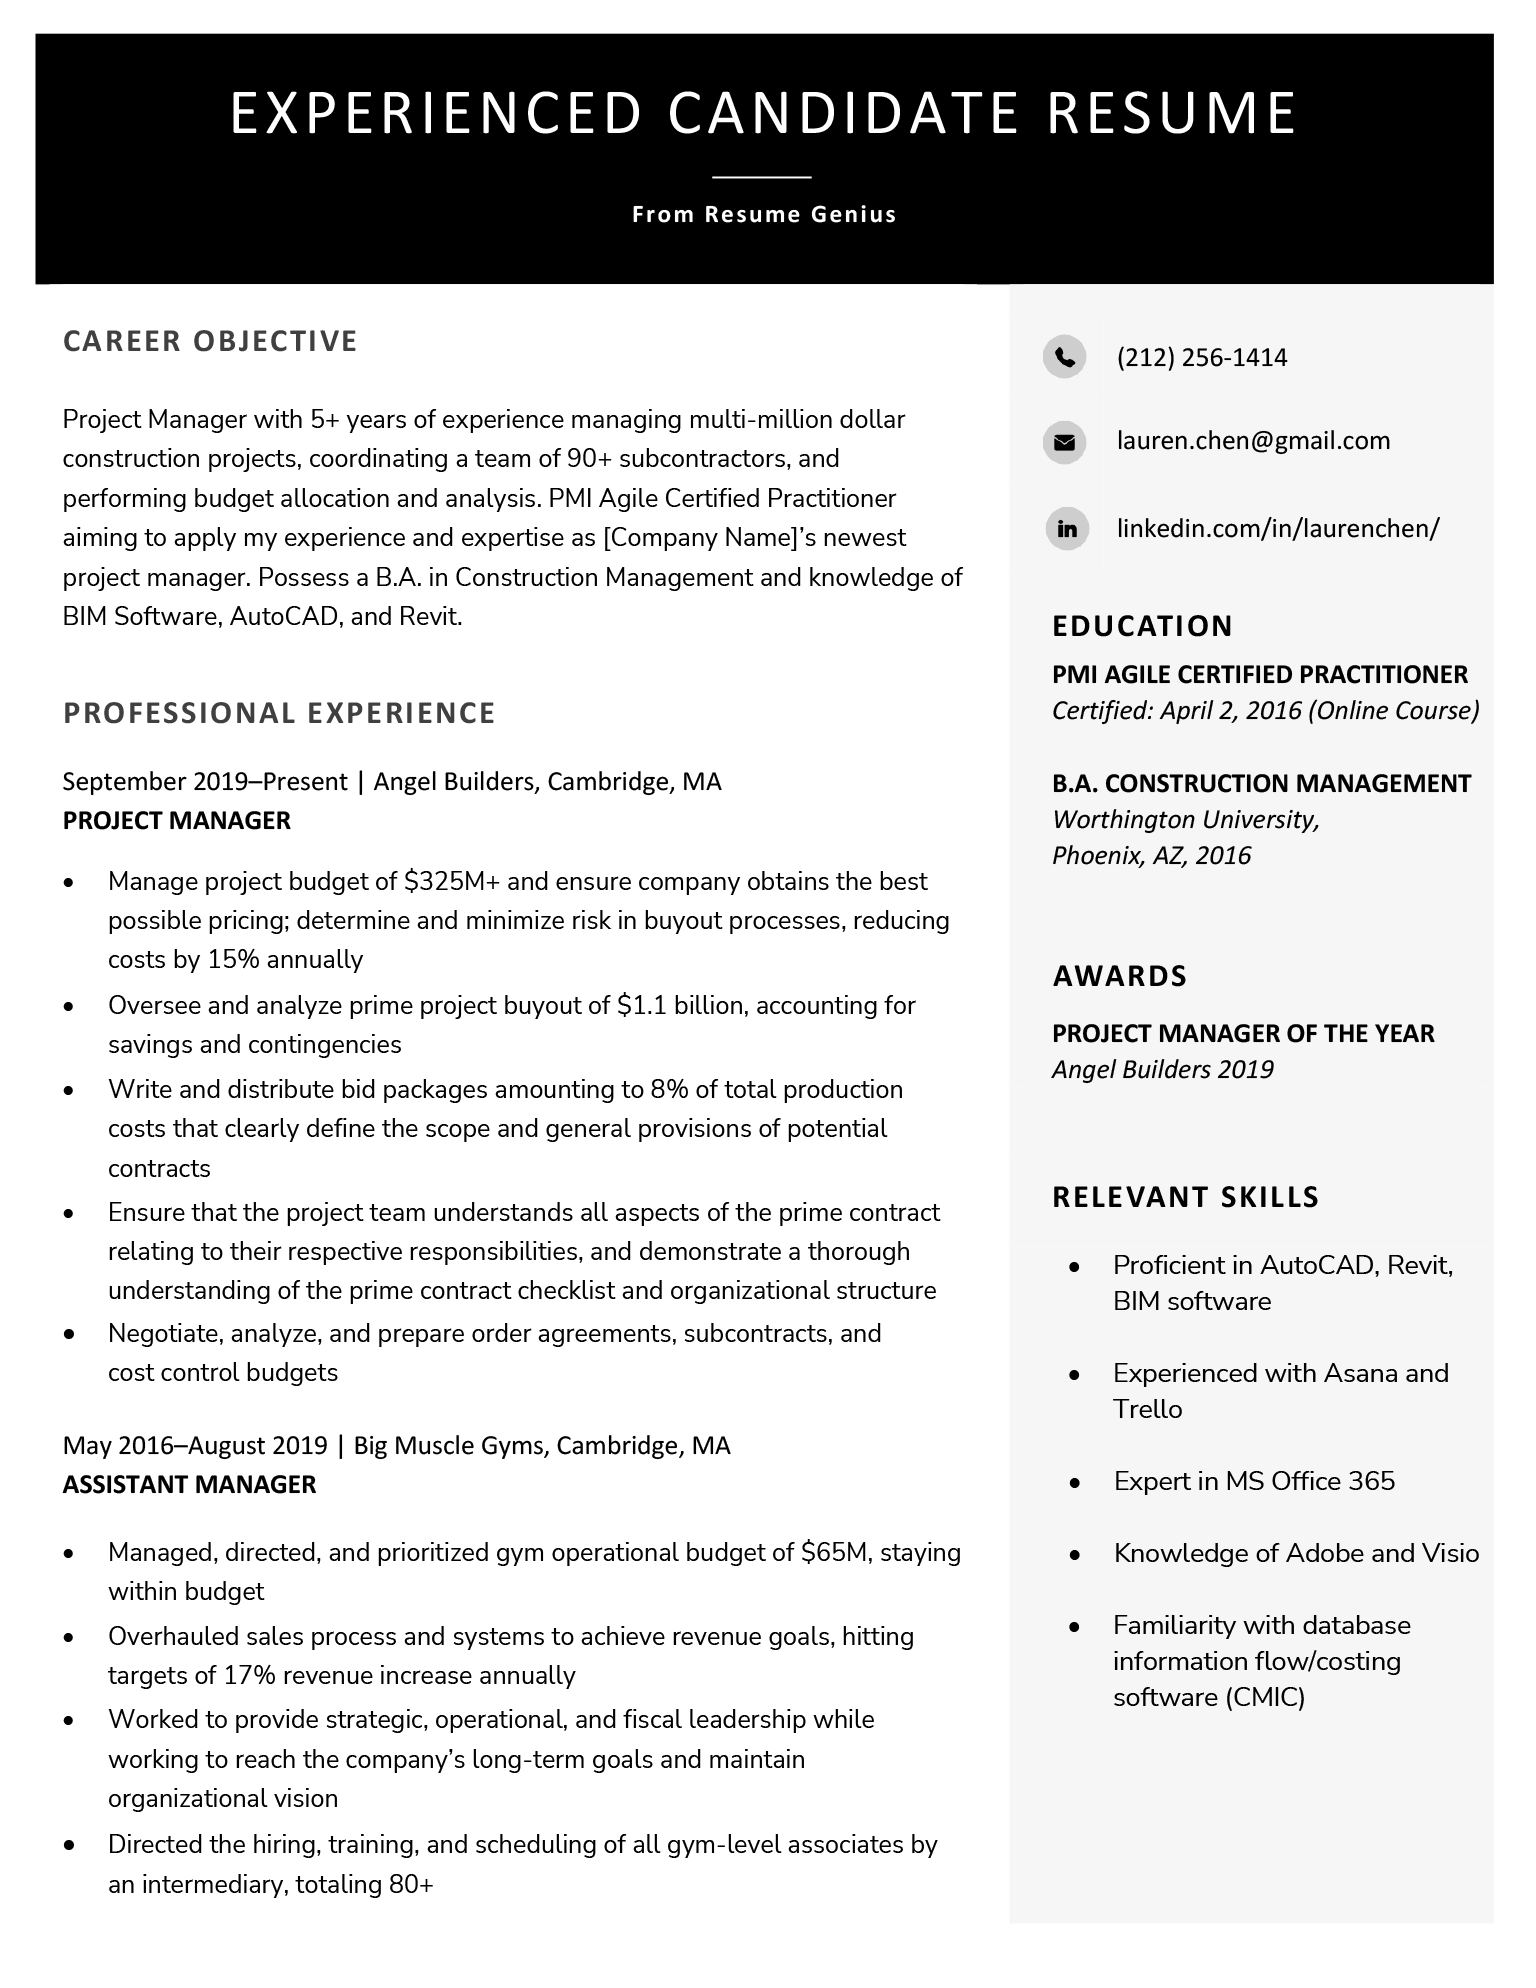 An example of a resume written by a candidate with work experience